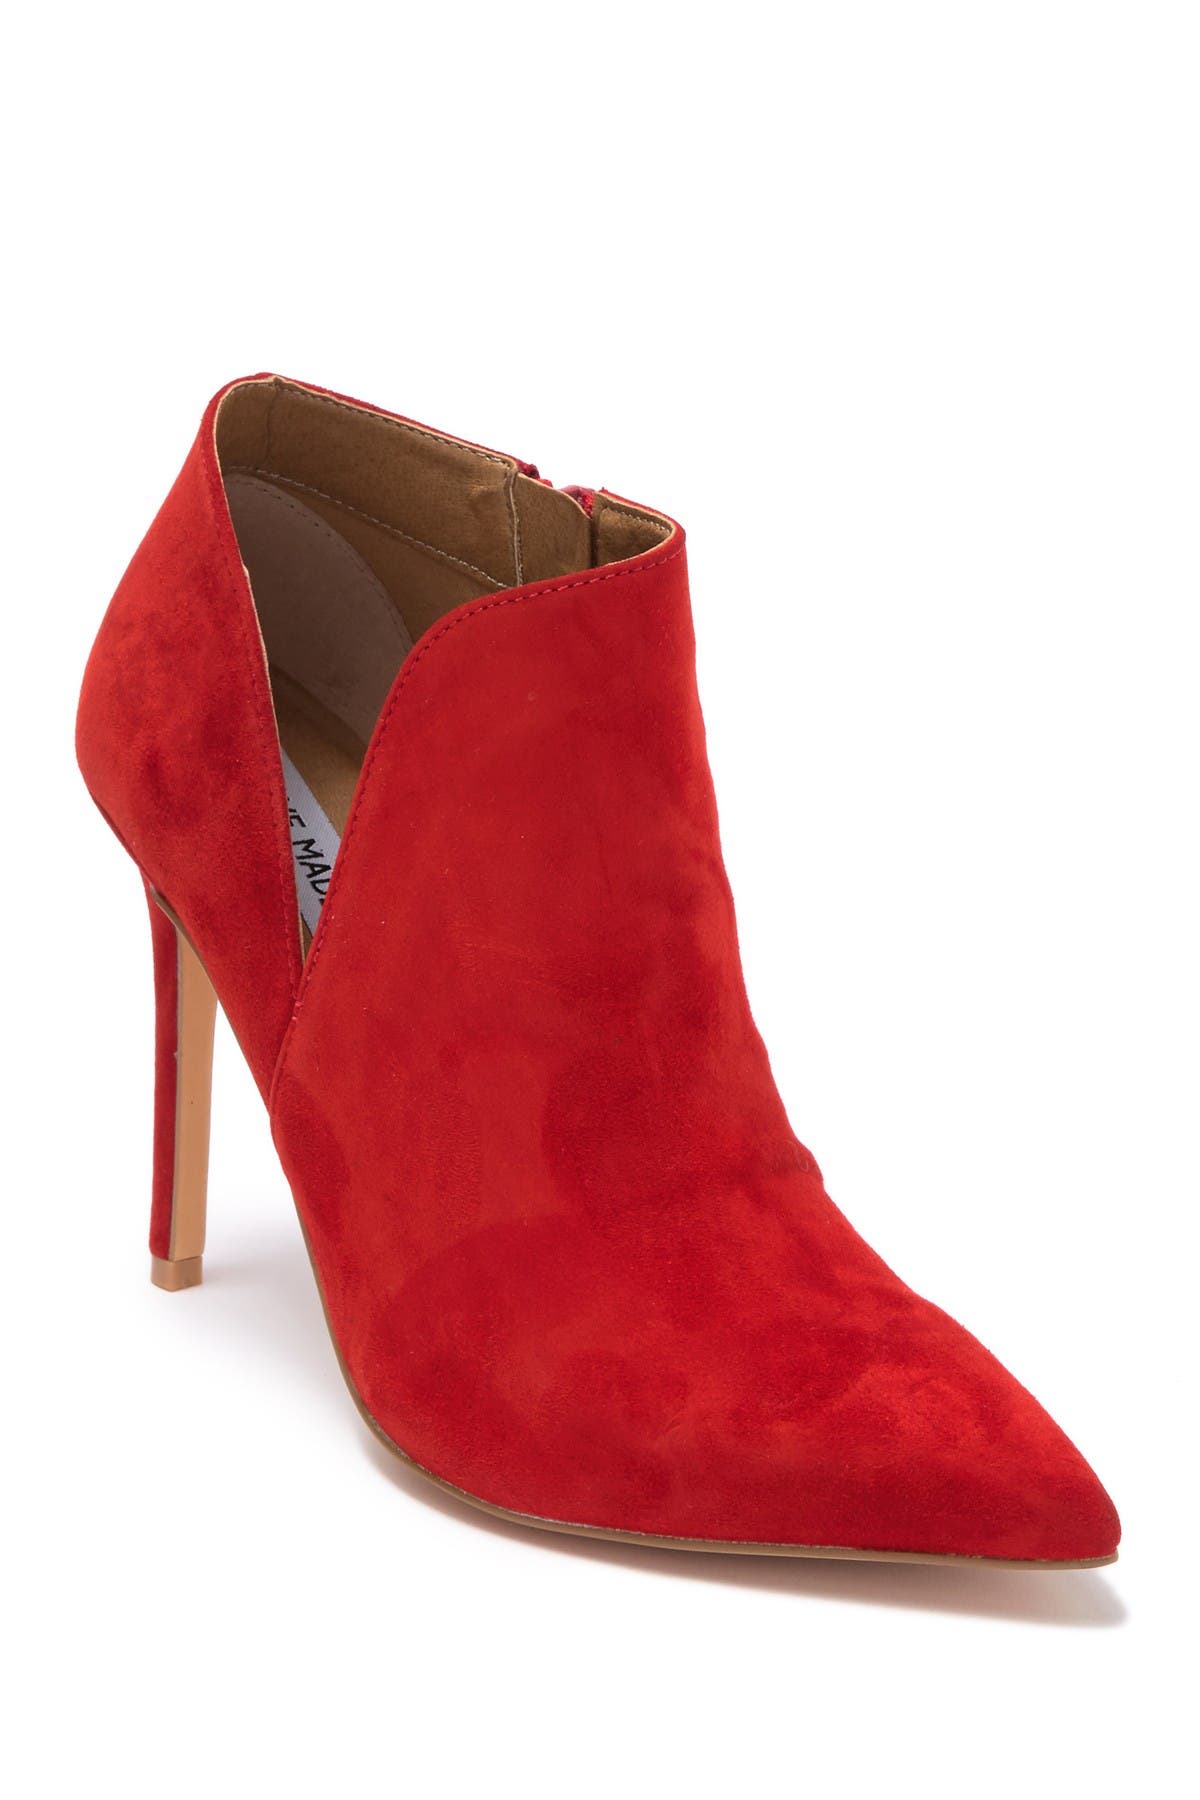 steve madden red ankle boots